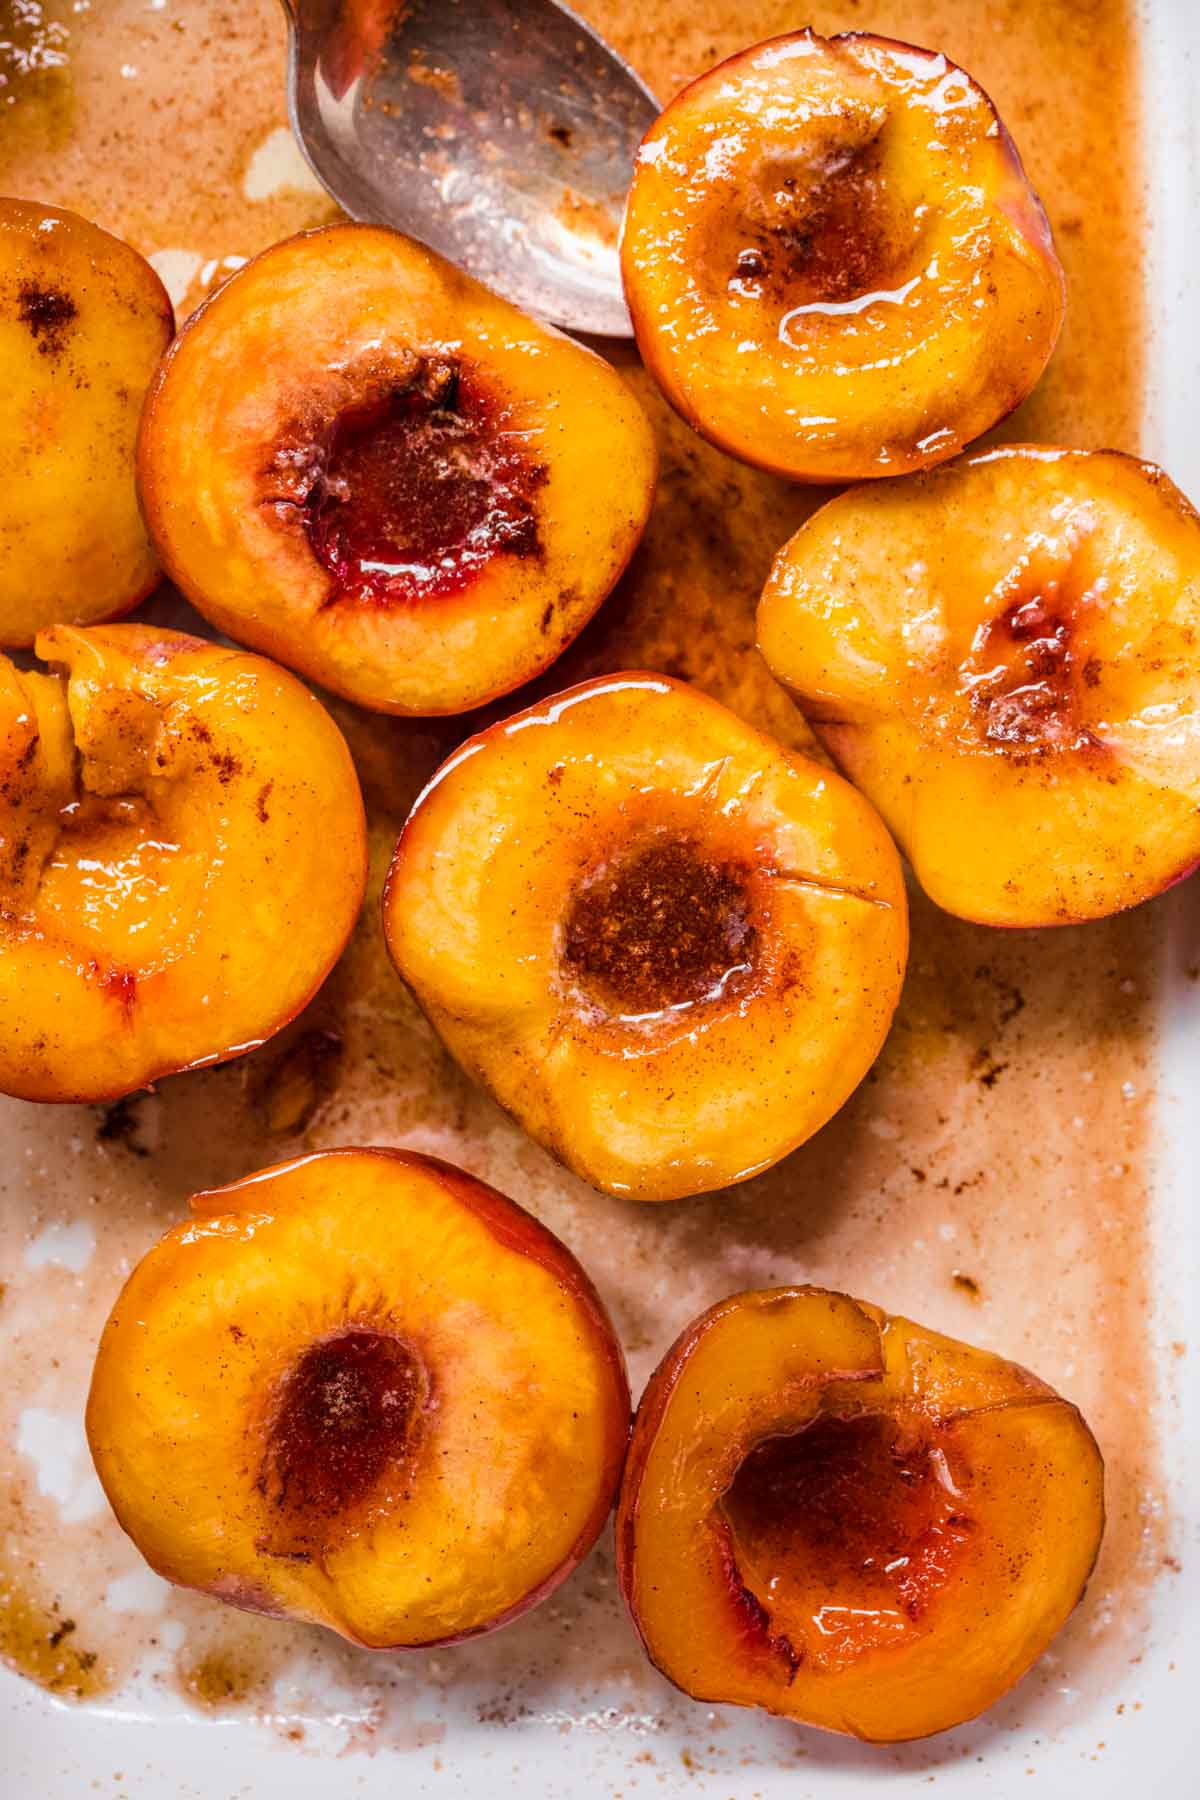 Peaches and Cream peaches on baking pan after baking